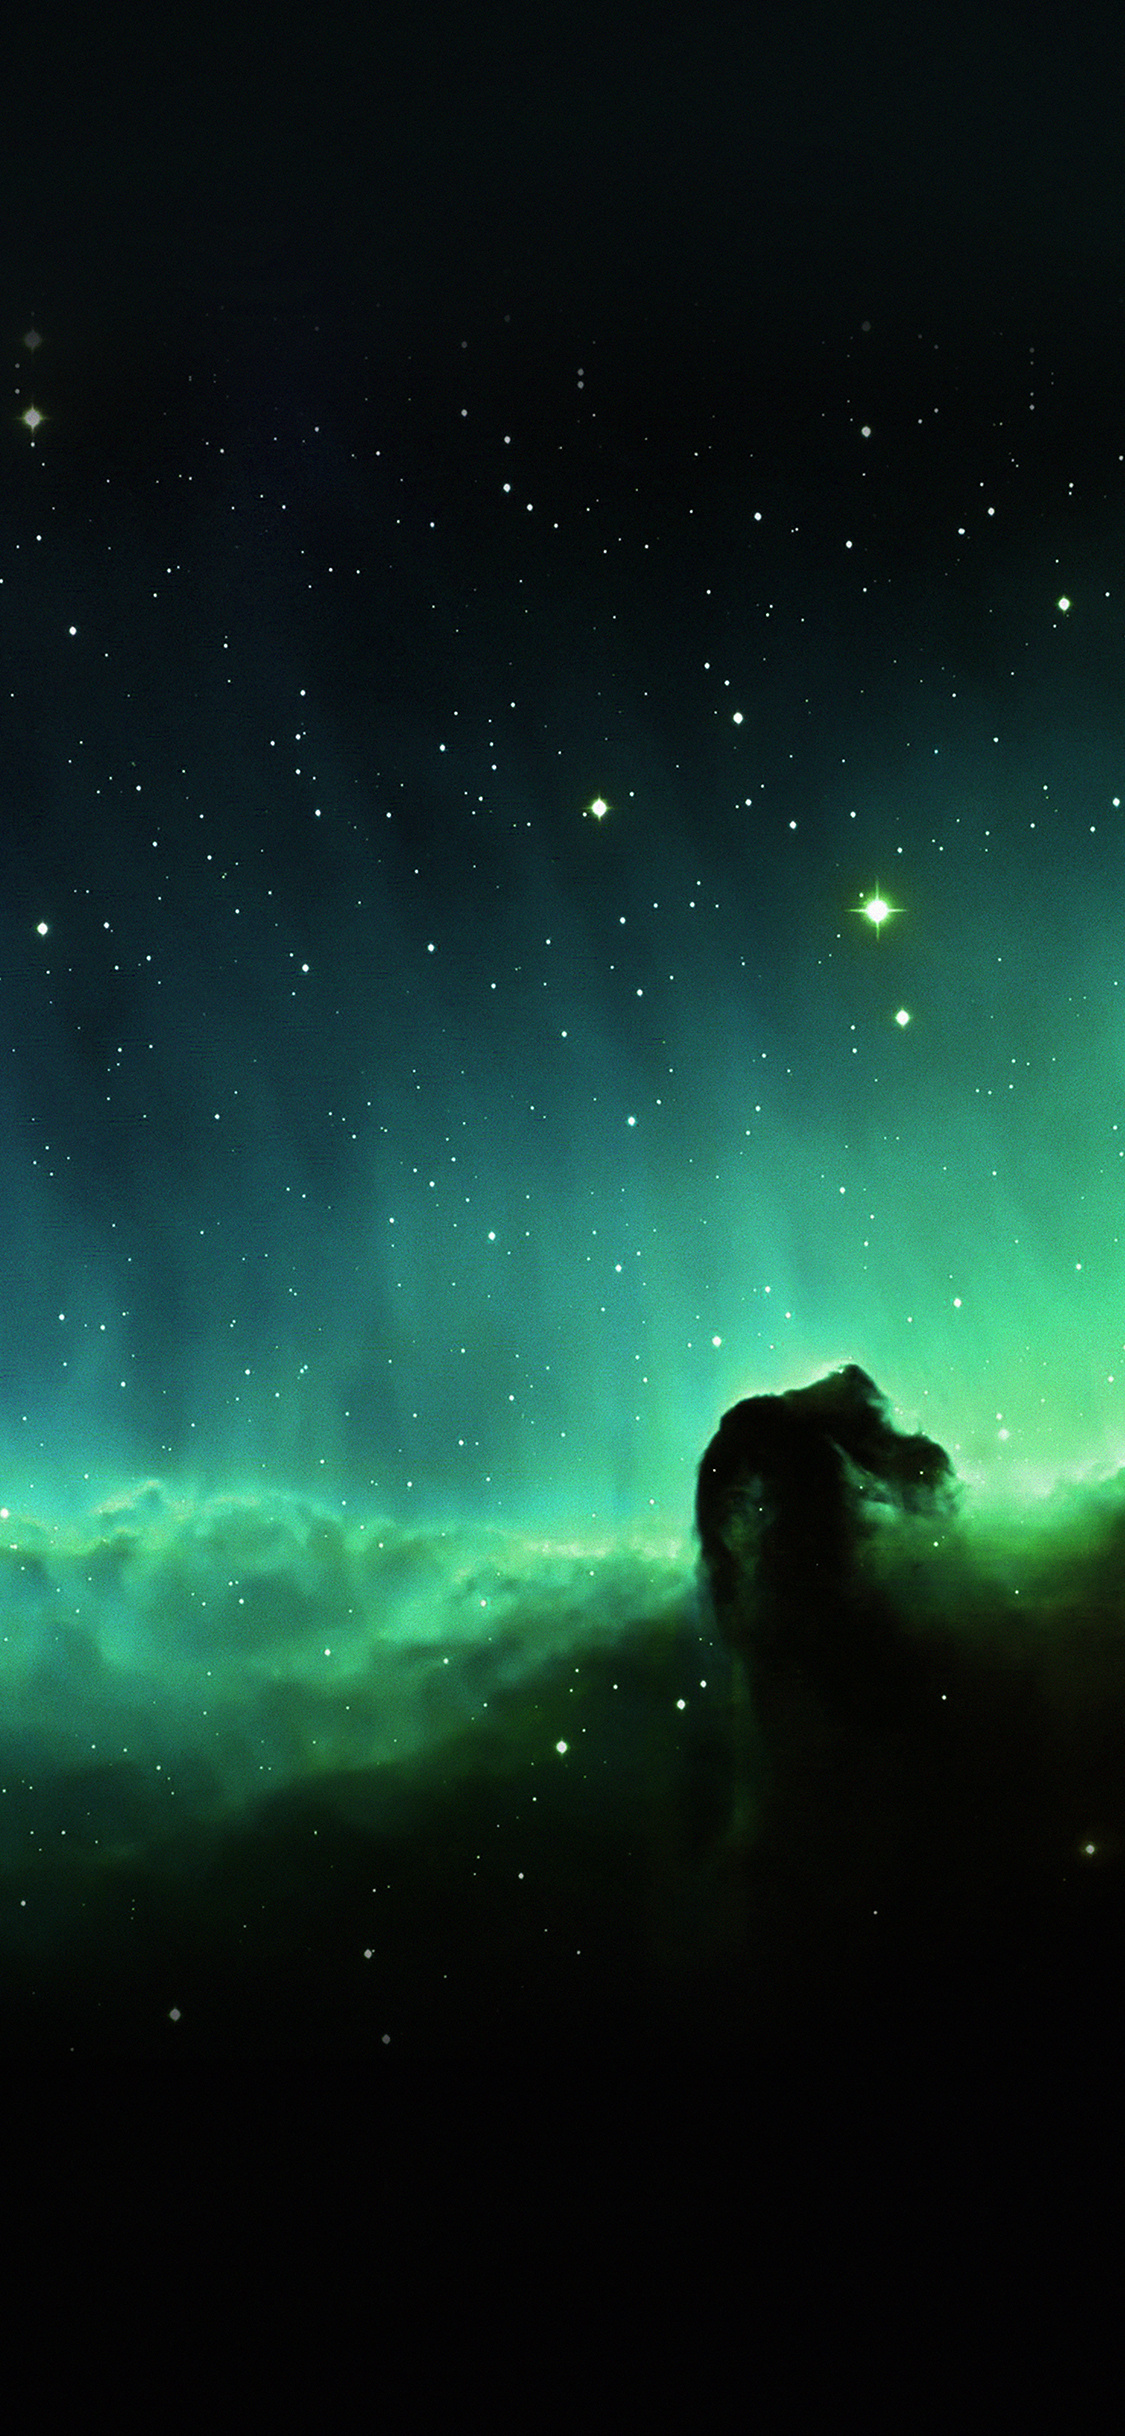 Green Nebula: Barnard 33, The Horsehead Nebula, The south of Alnitak, the easternmost star of Orion's Belt. 1130x2440 HD Background.